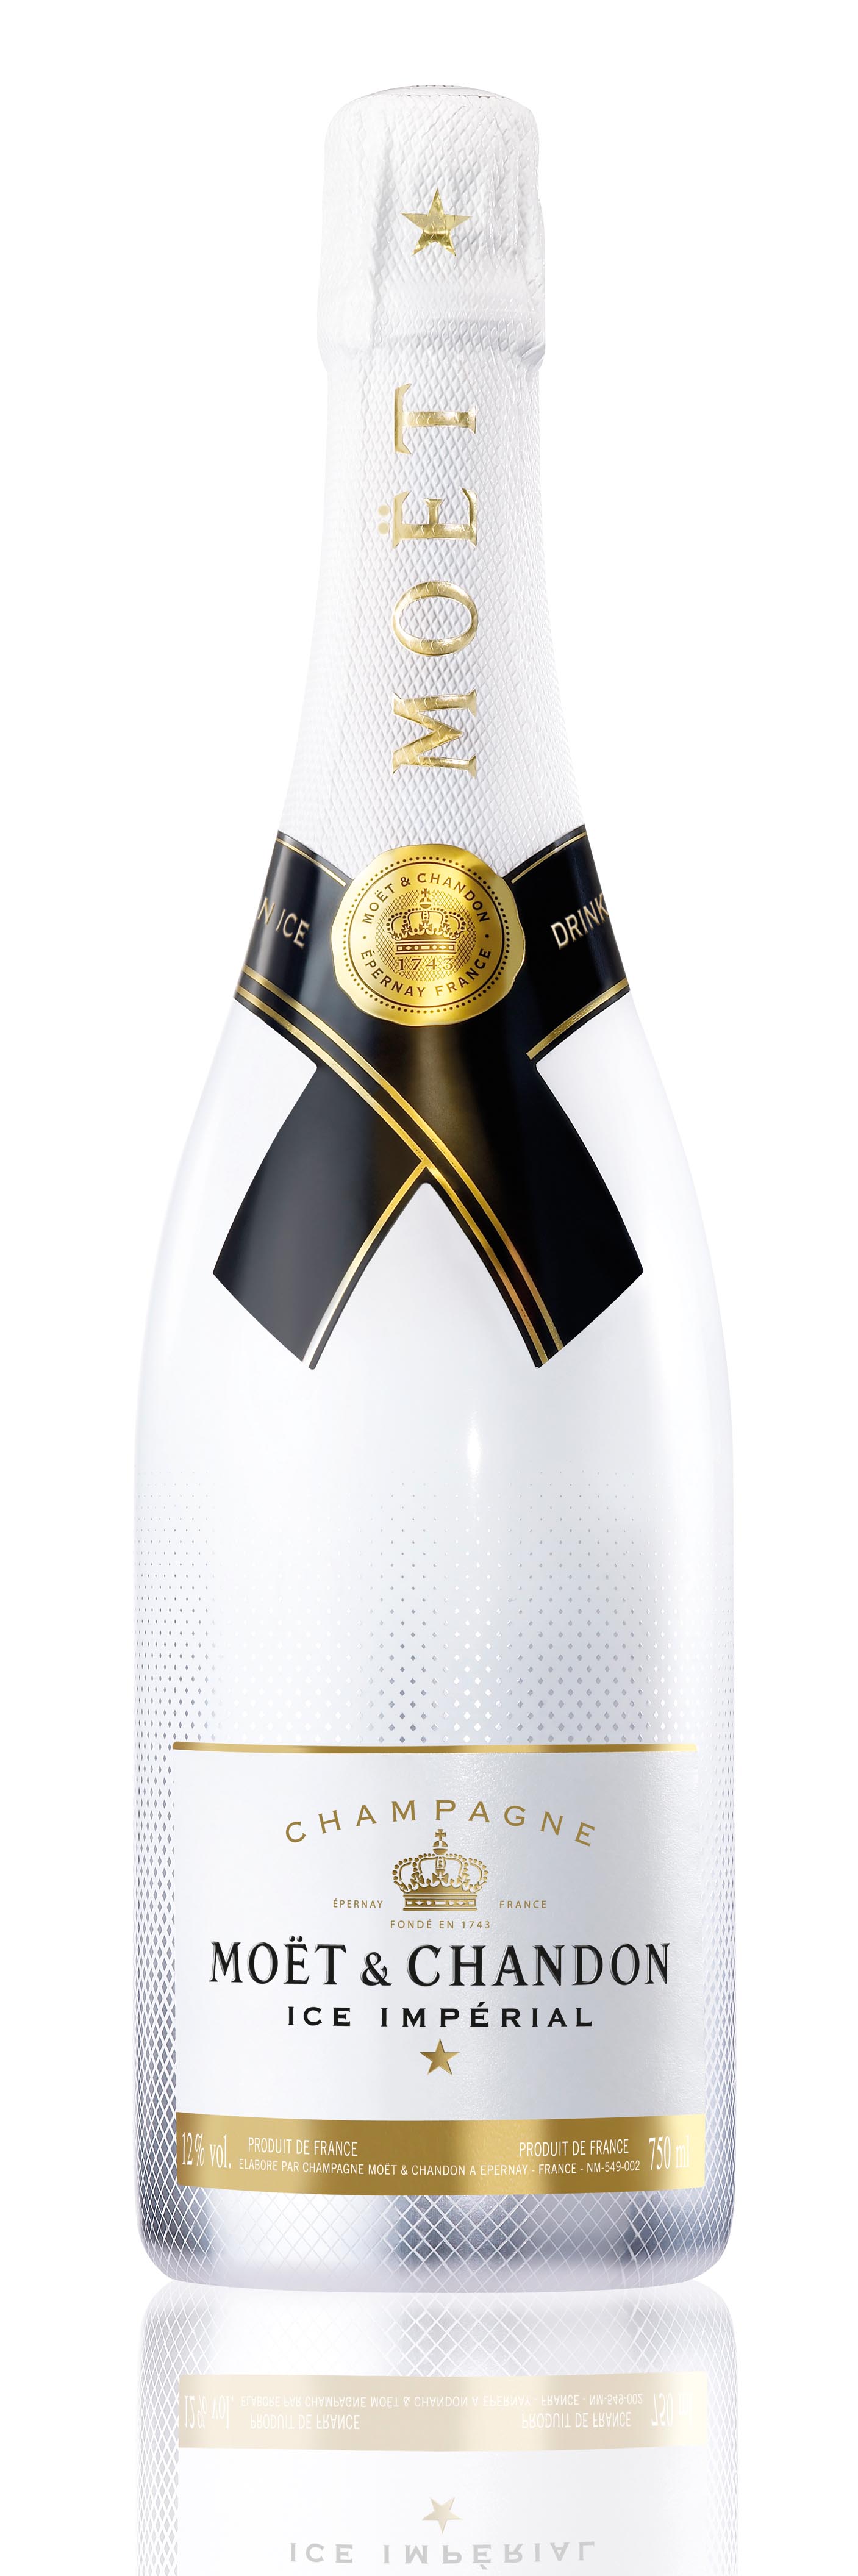 Moet_&_Chandon_Ice_Impérial